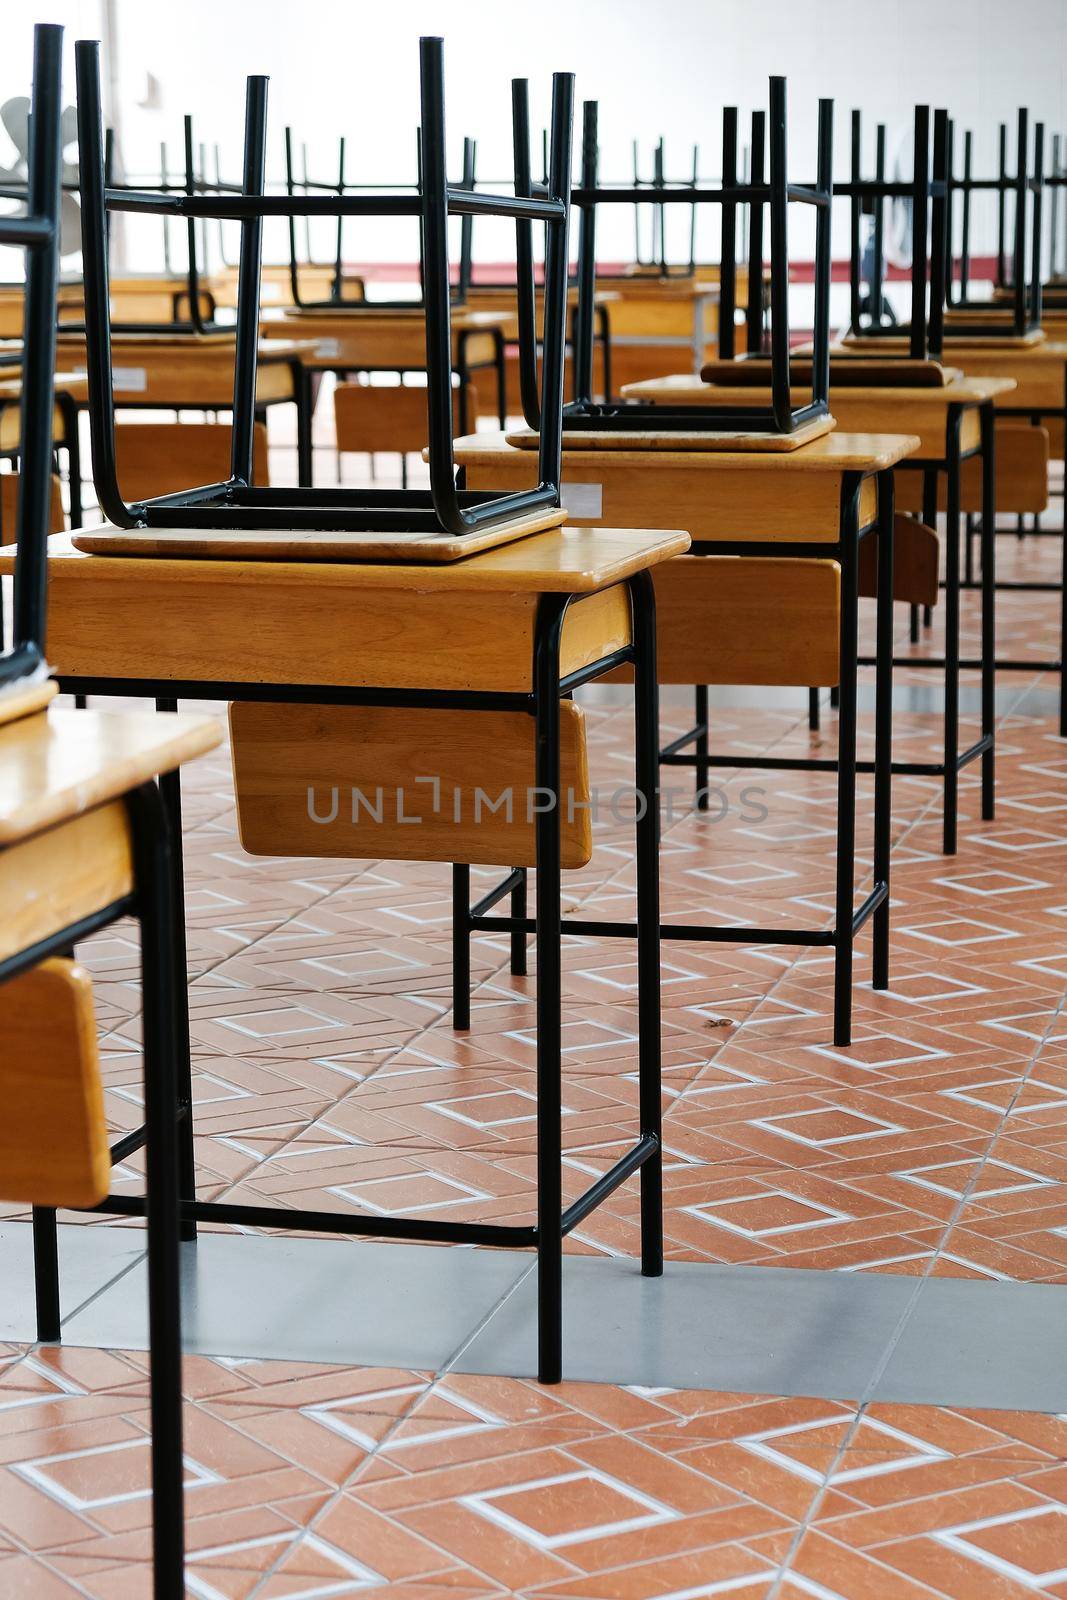 Desk and chairs in classroom by ponsulak